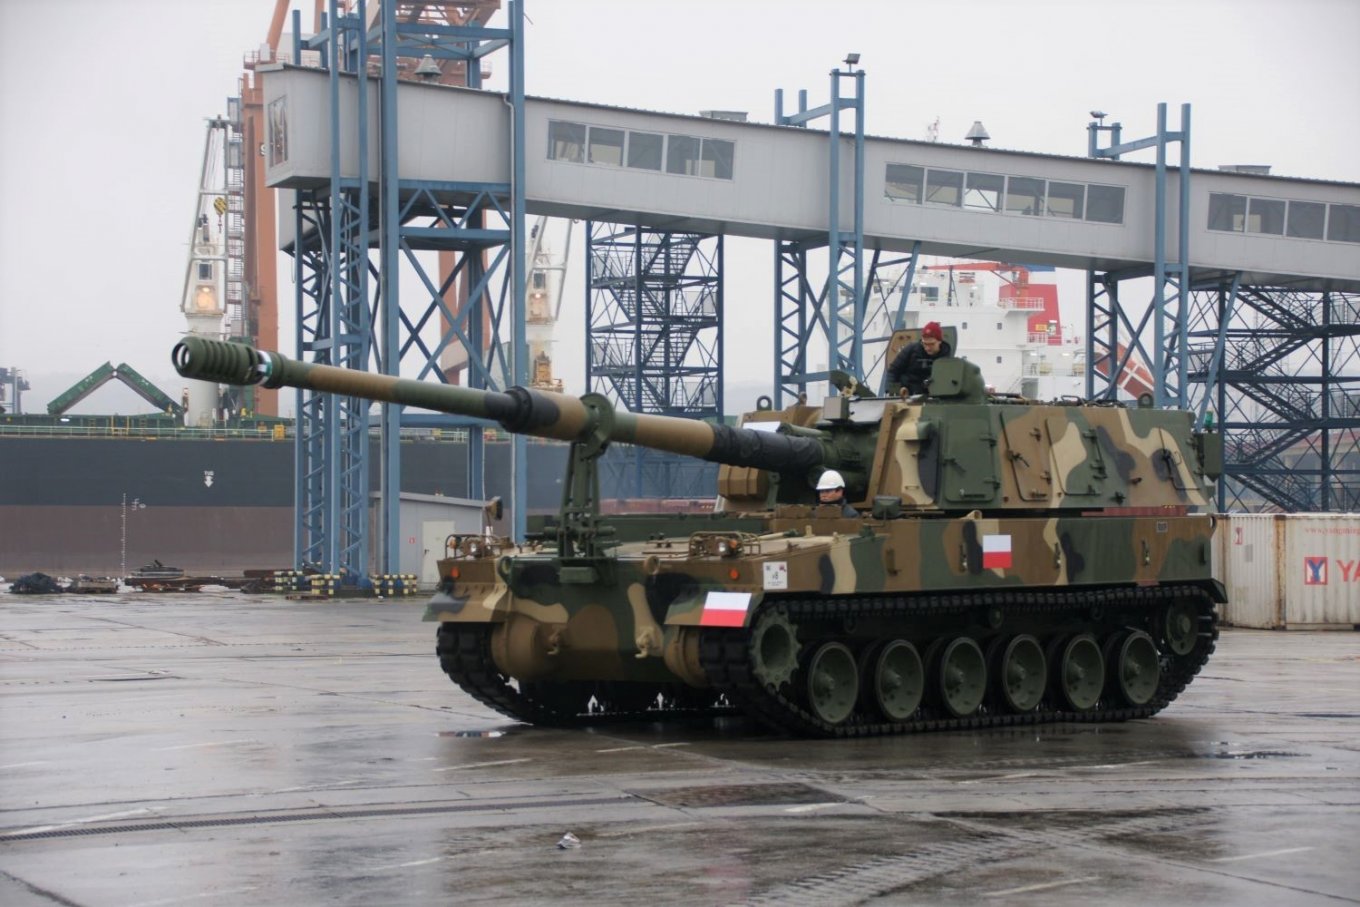 It Took Poland 102 Days to Get Korean K2 Tanks And K9 Self-Propelled Funs – of Them 35 Days Were Spent On the Road (Detailed Photos), Defense Express, war in Ukraine, Russian-Ukrainian war